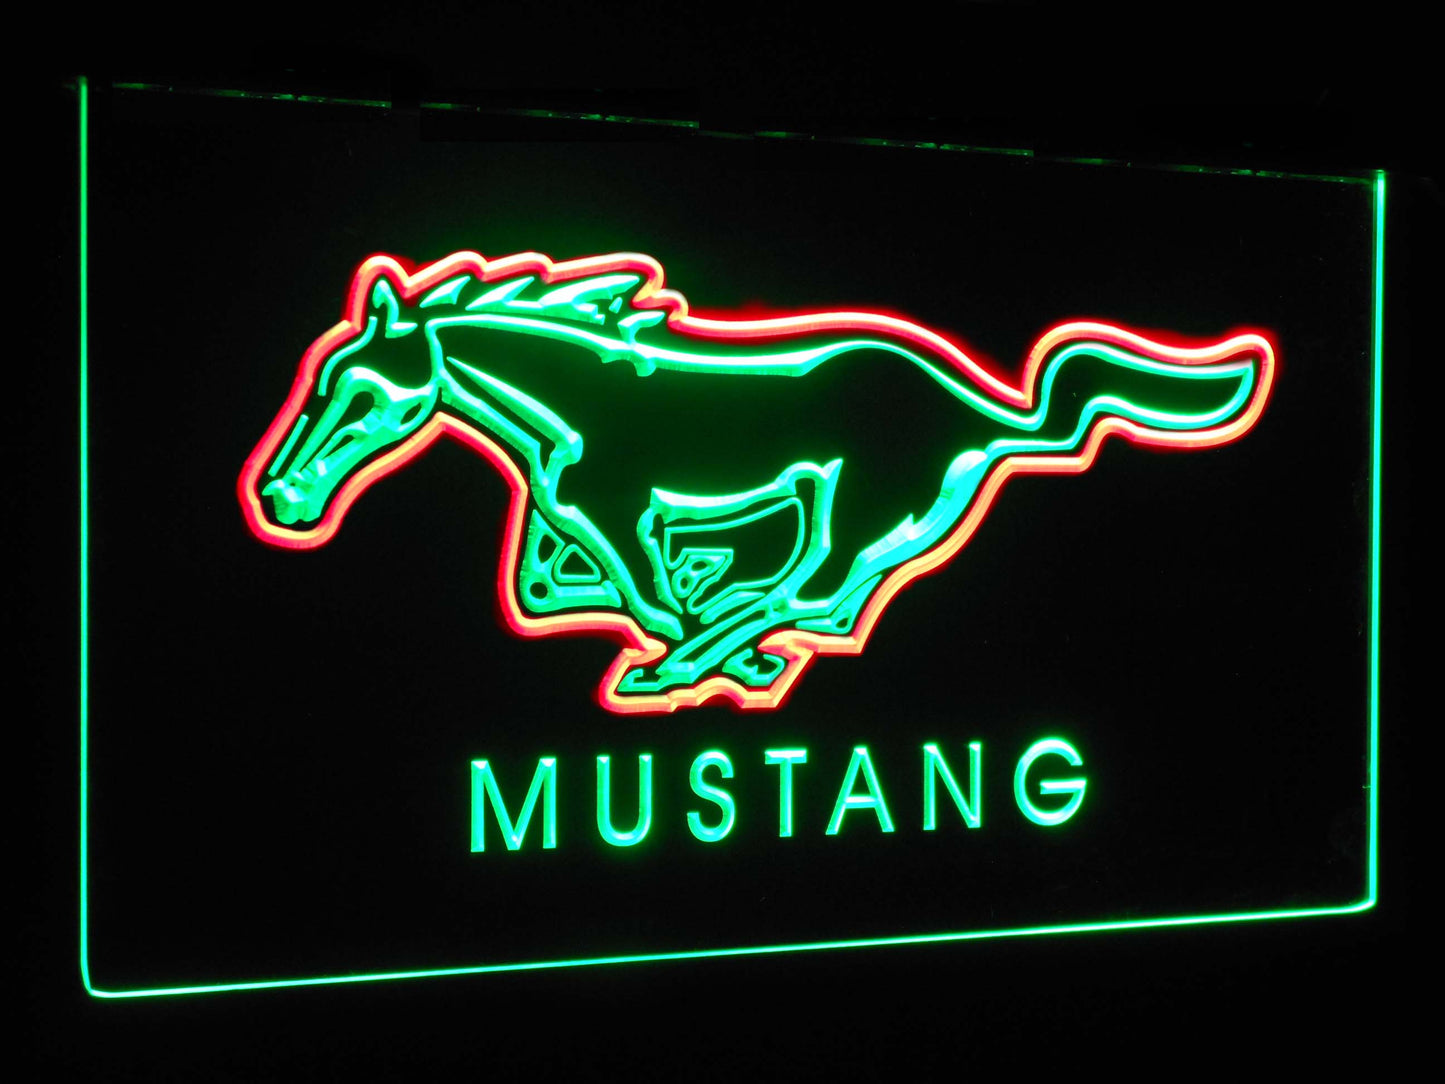 Mustang Ford Horse Car Bar Decoration Gift Dual Color Led Neon Light Signs st6-d0054 by Woody Signs Co. - Handmade Crafted Unique Wooden Creative